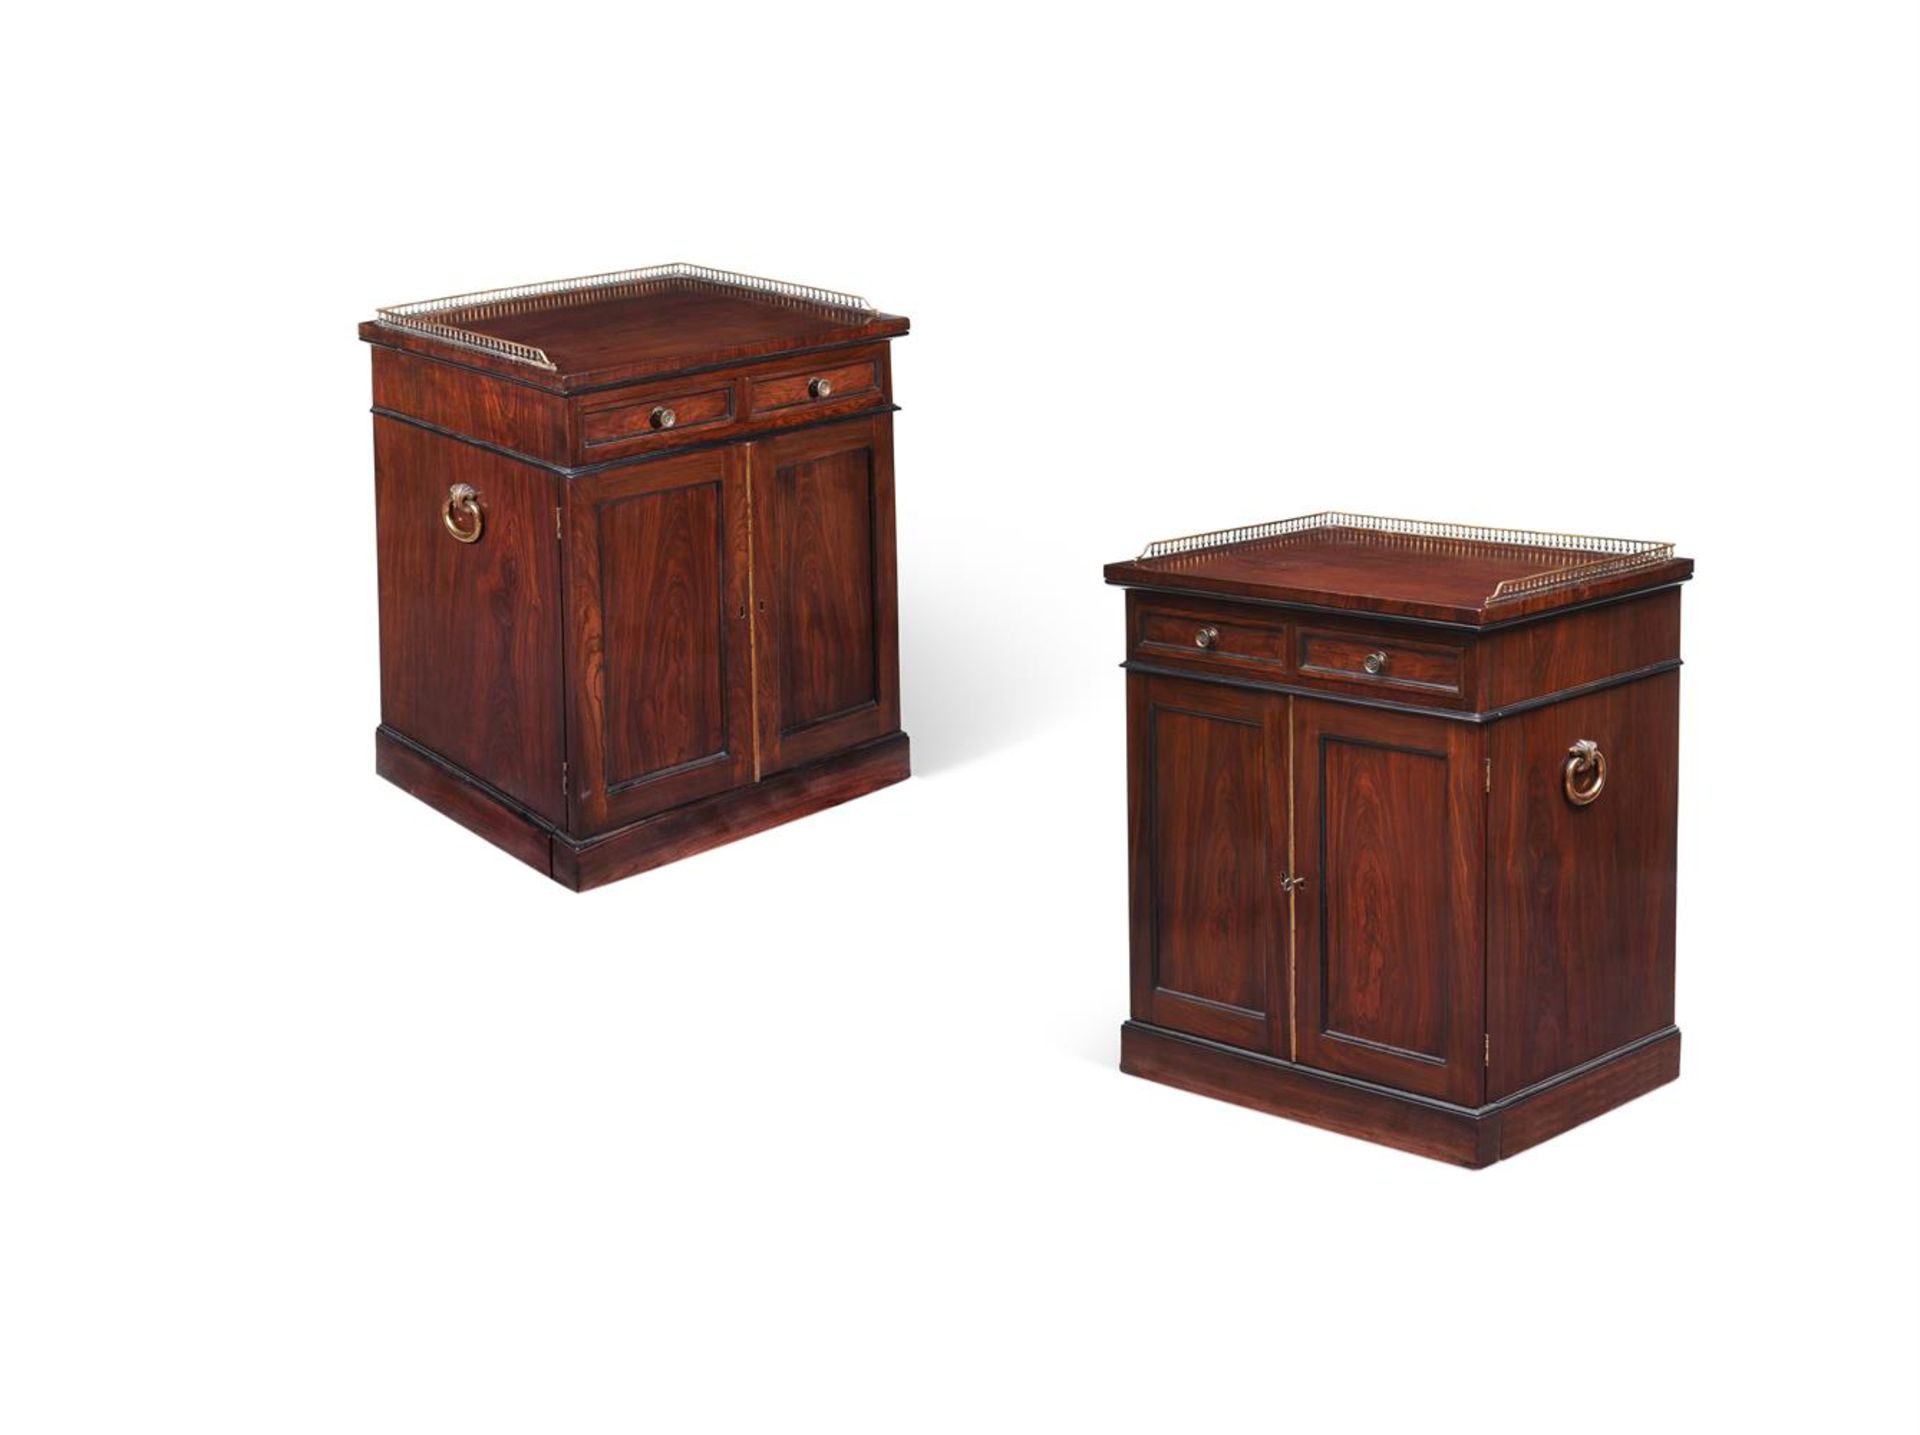 Y A RARE PAIR OF REGENCY EXOTIC ROSEWOOD, OAK, EBONISED AND BRASS MOUNTED BEDSIDE CABINETS